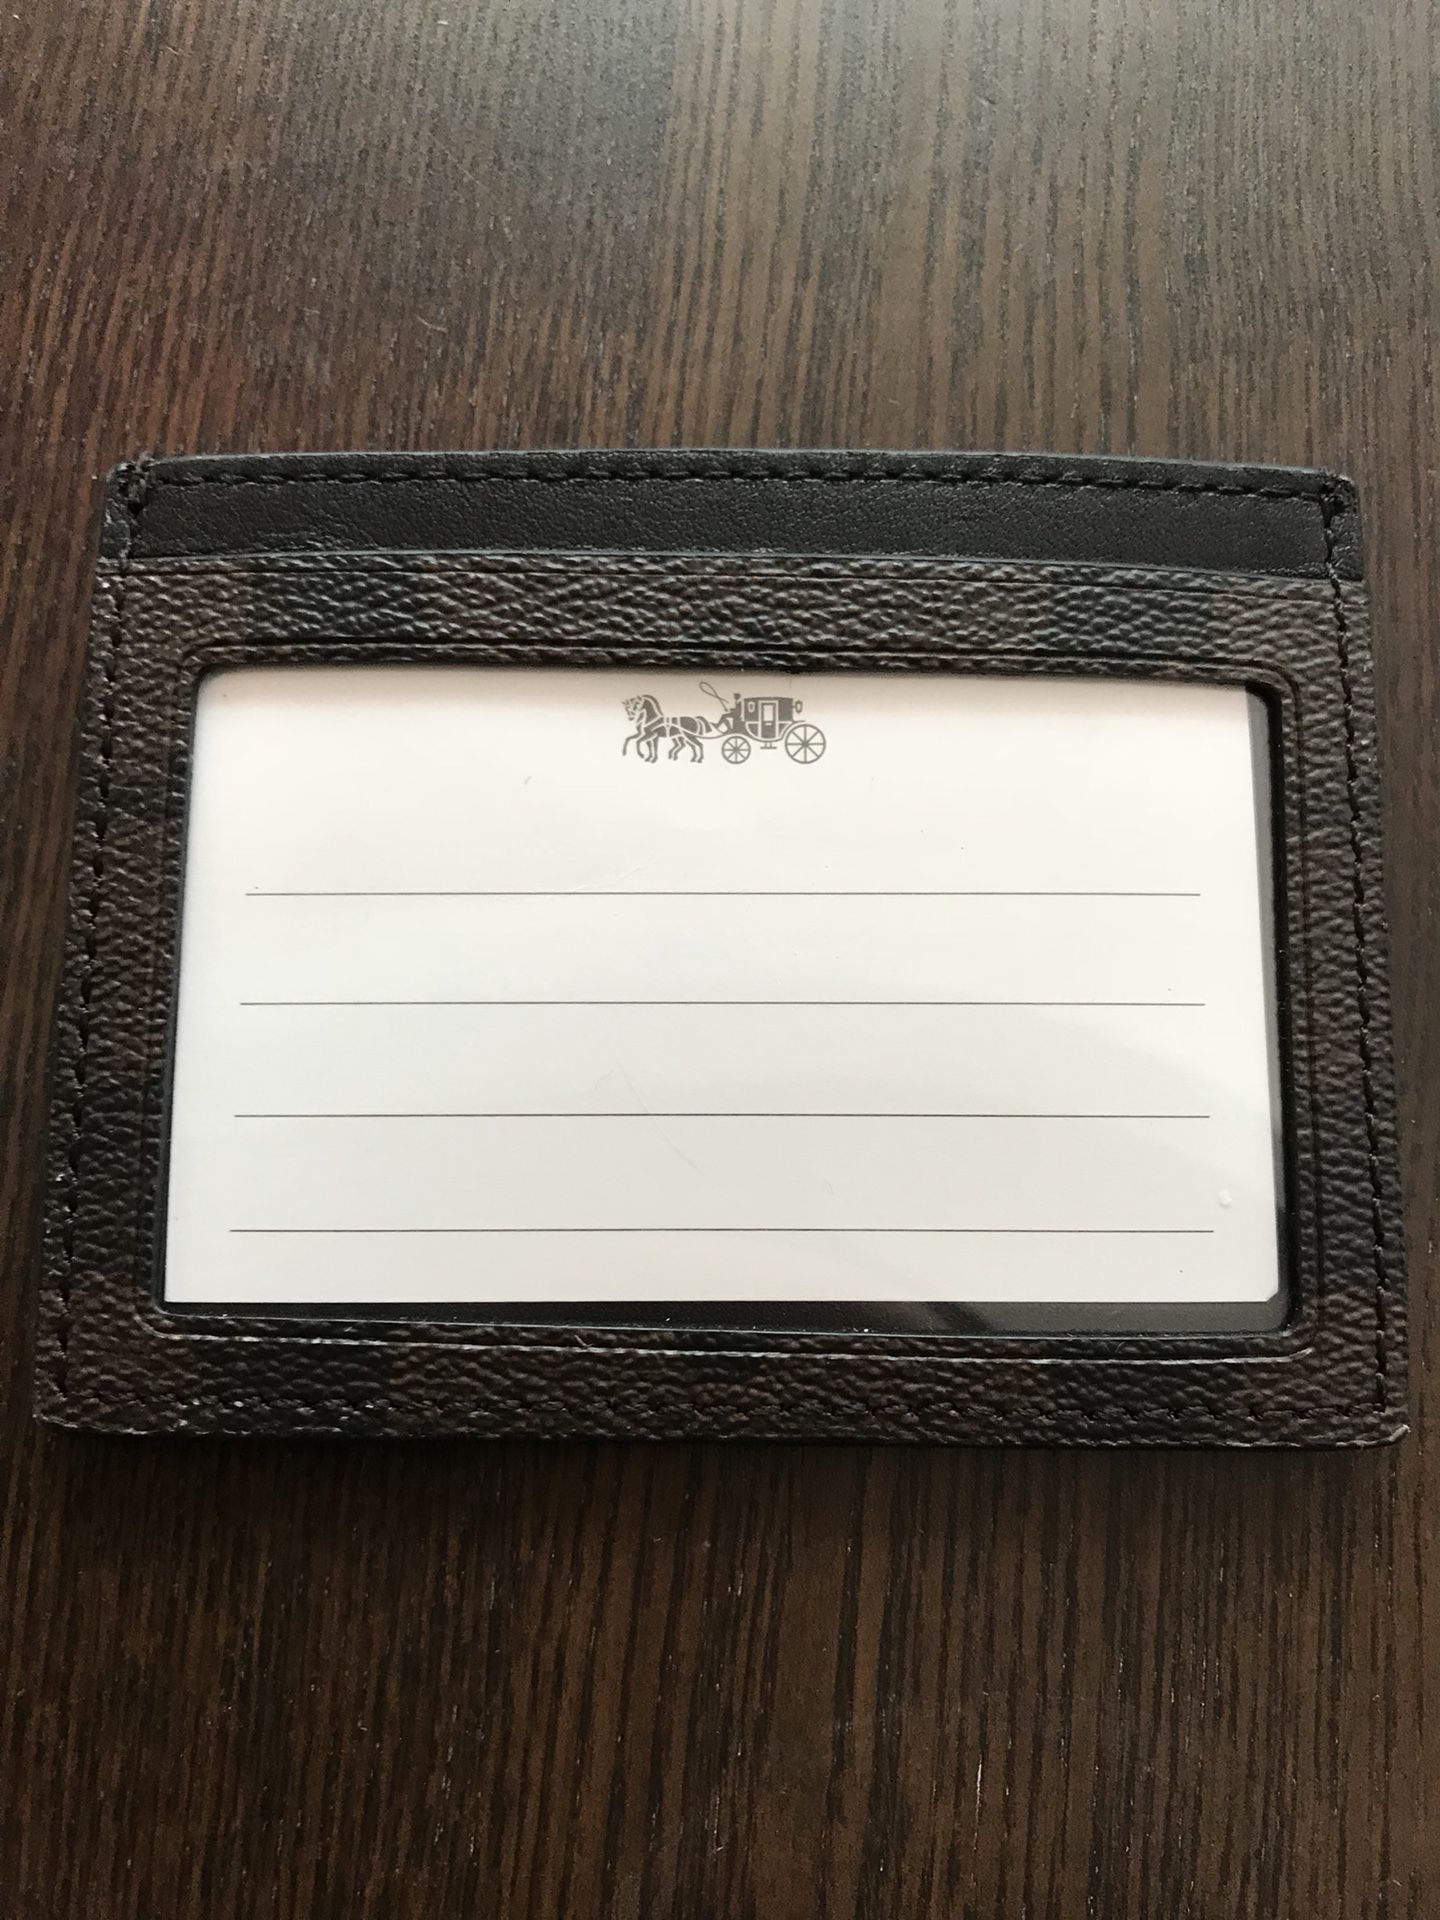 COACH ID CARD CS SIGNATURE MAHOGANY/BROWN MEN'S LEATHER WALLET F58110 $75  NEW NWT for Sale in San Diego, CA - OfferUp